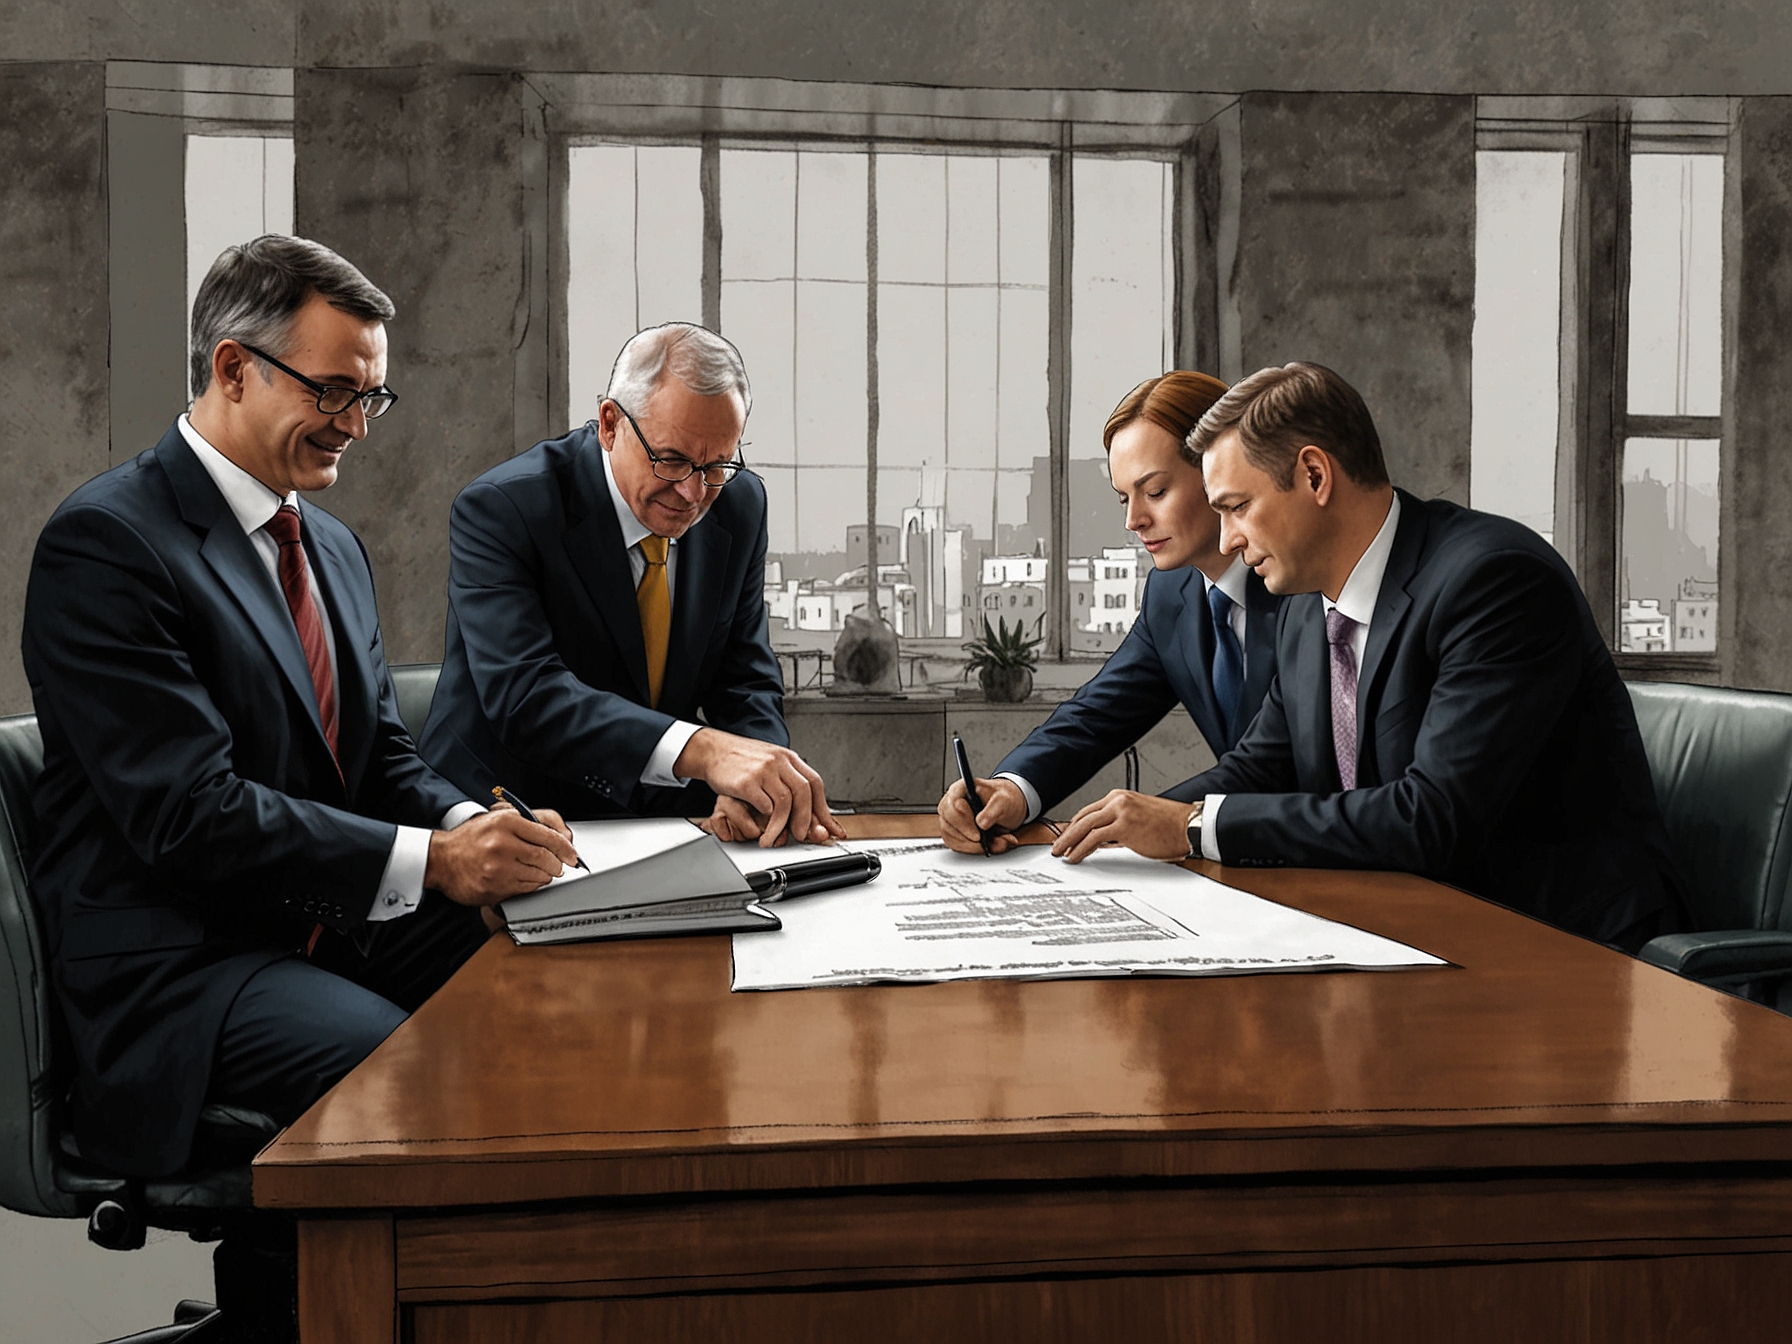 A visual representation of executives from Cornish Metals and Northera Resources Ltd. signing the binding letter of intent, symbolizing the significant transaction and partnership.